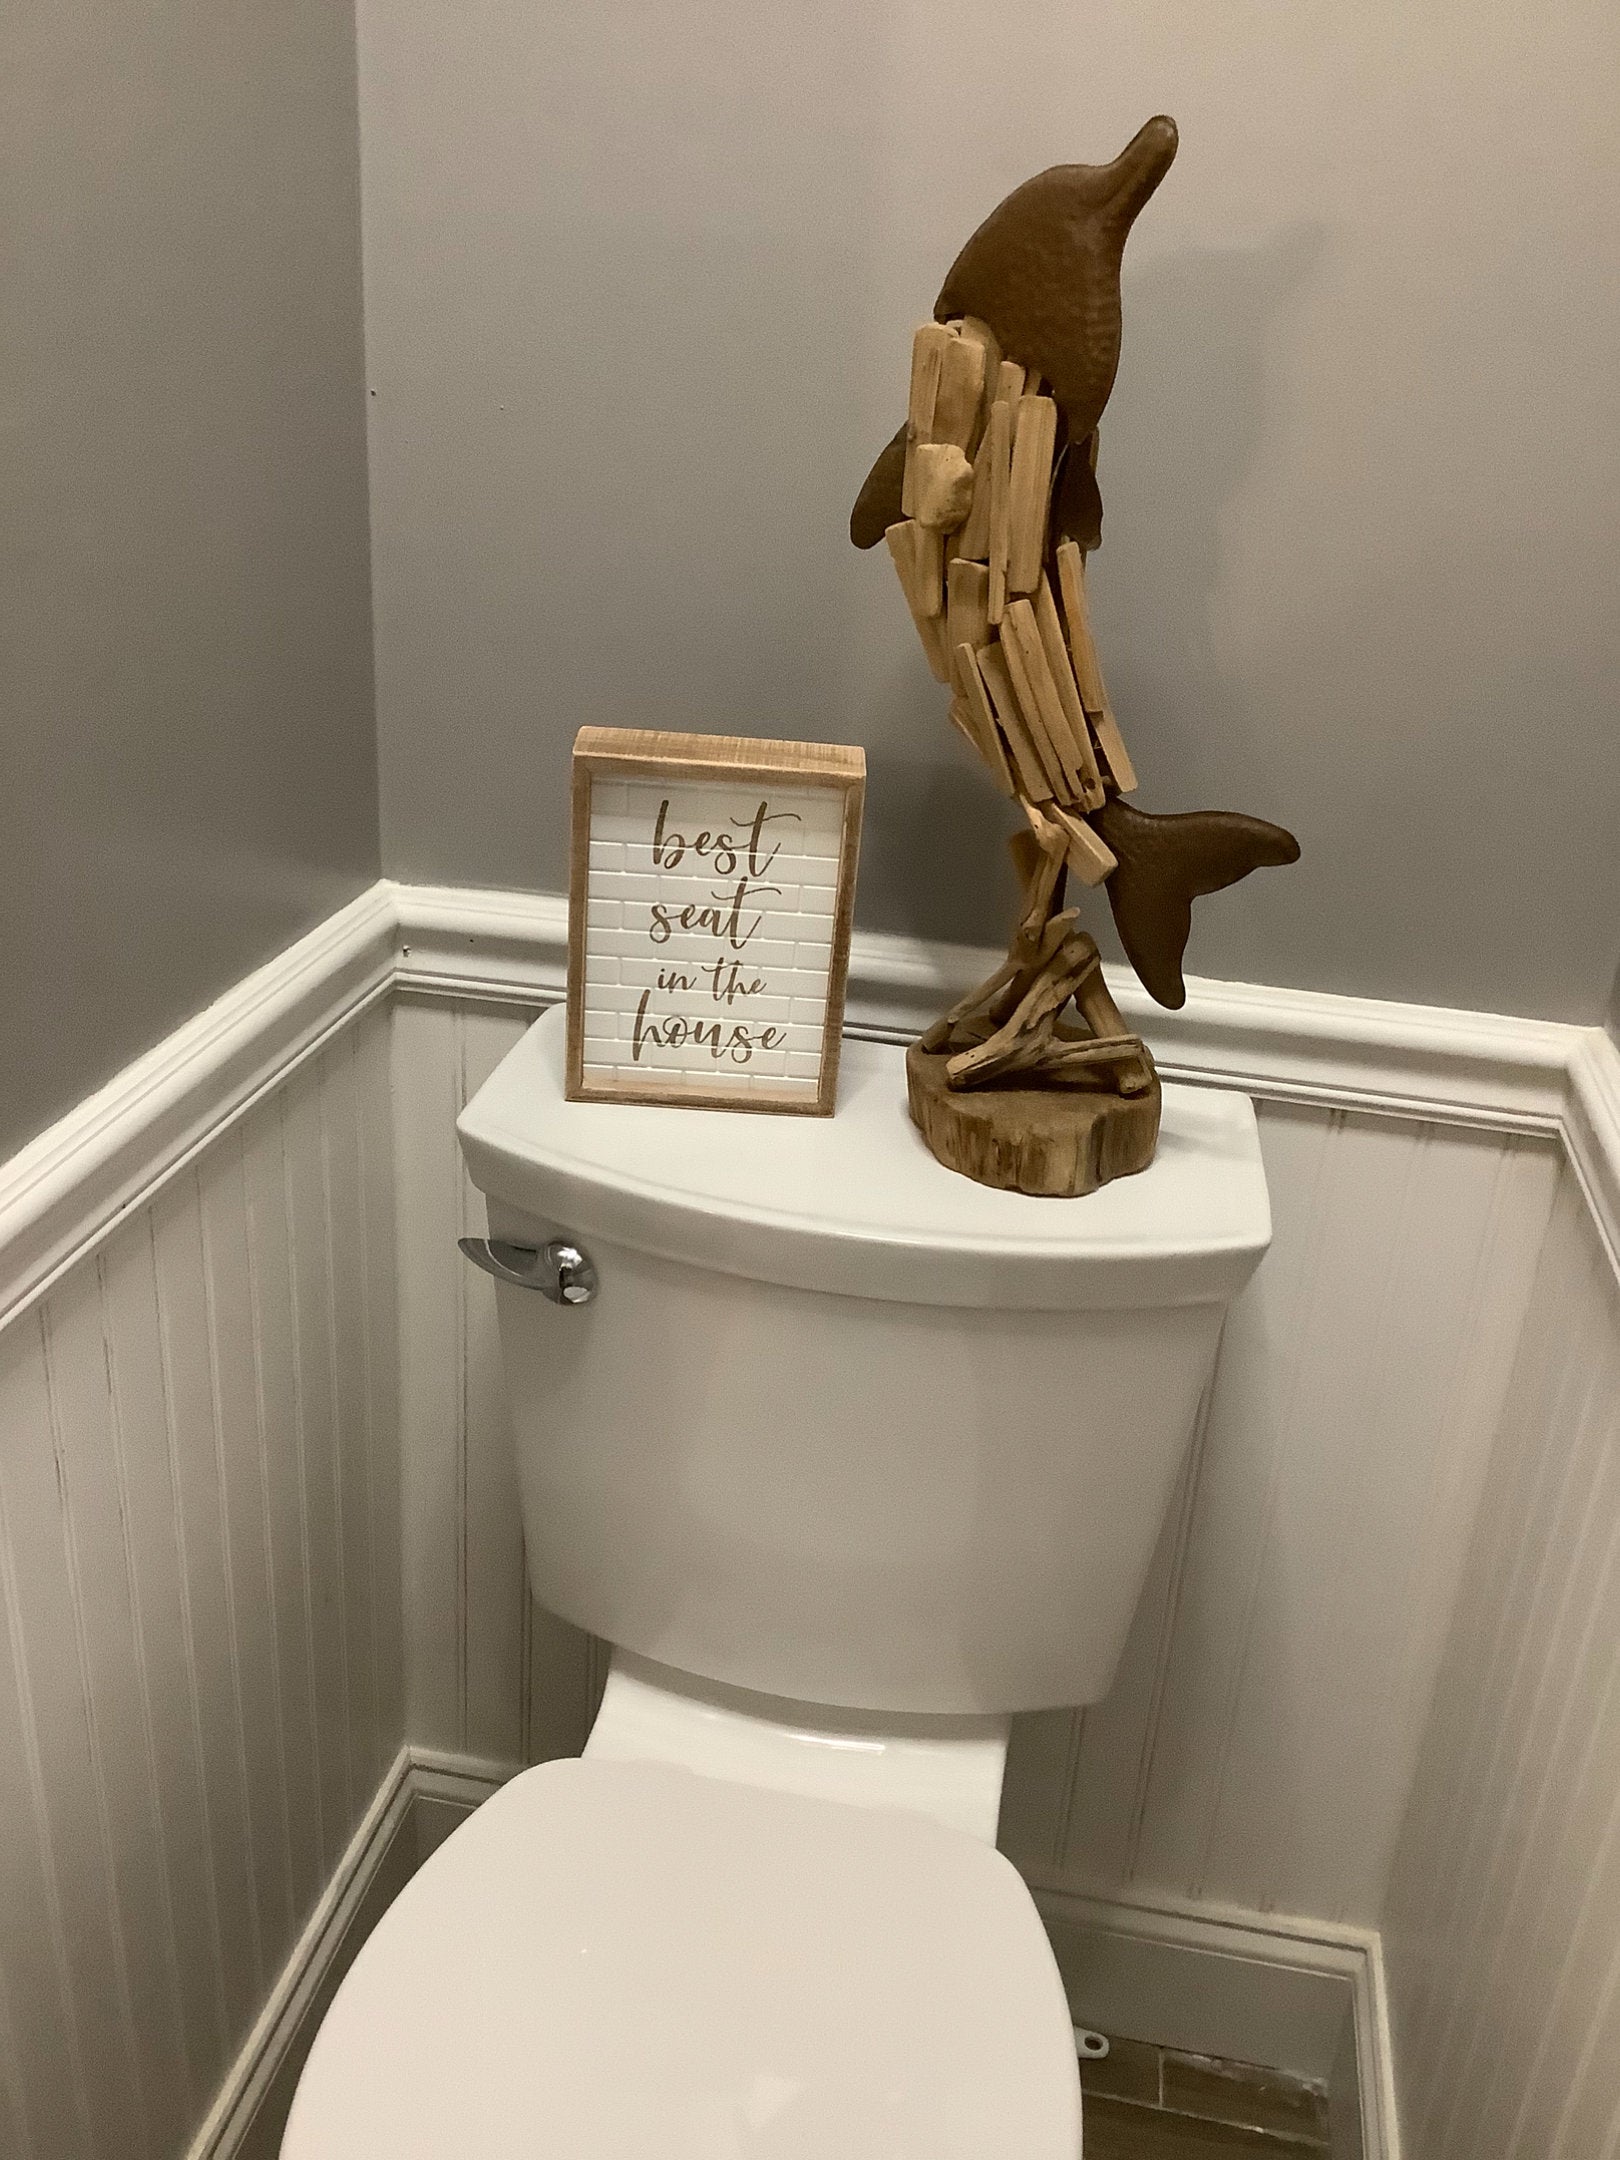 Best Seat in the House Bathroom Sign